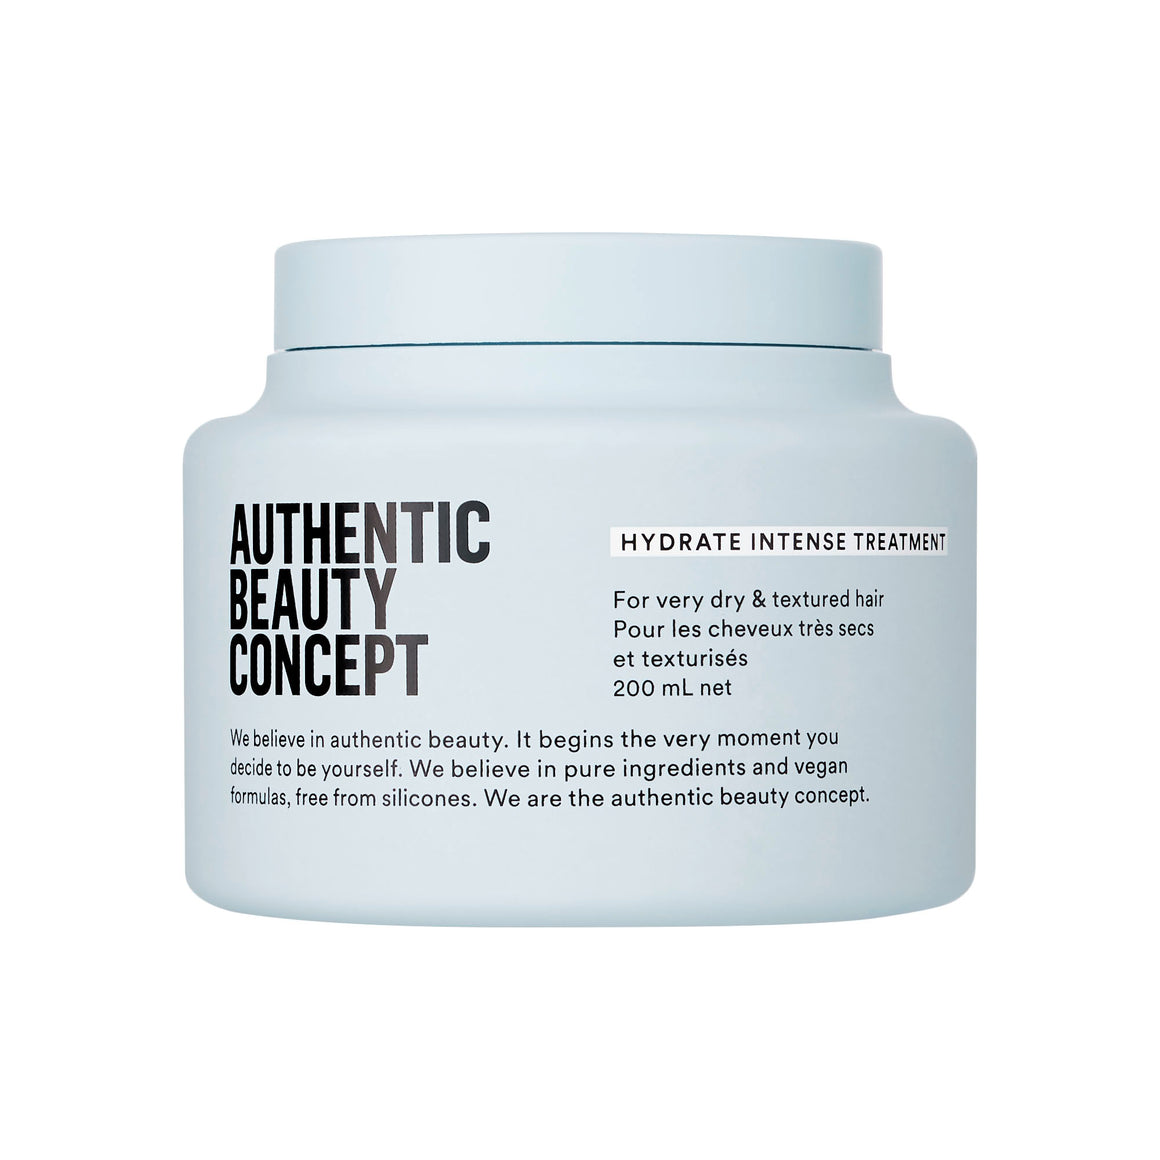 Authentic Beauty Concept Hydrate Intense Treatment 200ml at Eds Hair Bramhall